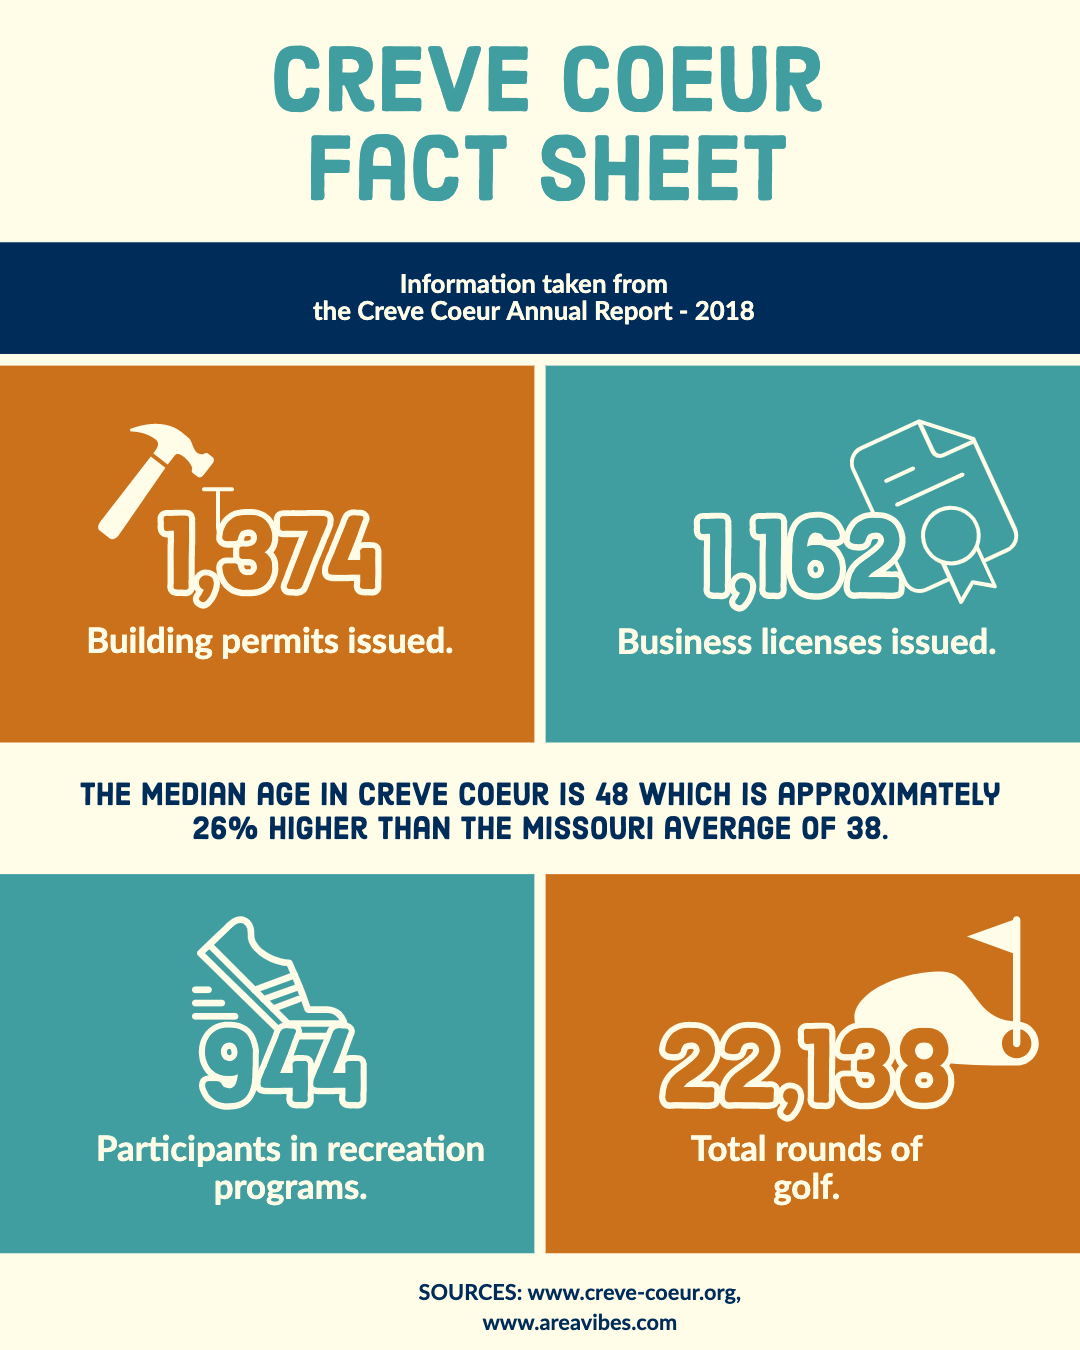 Creve Coeur fact sheet for Real Estate Infographic